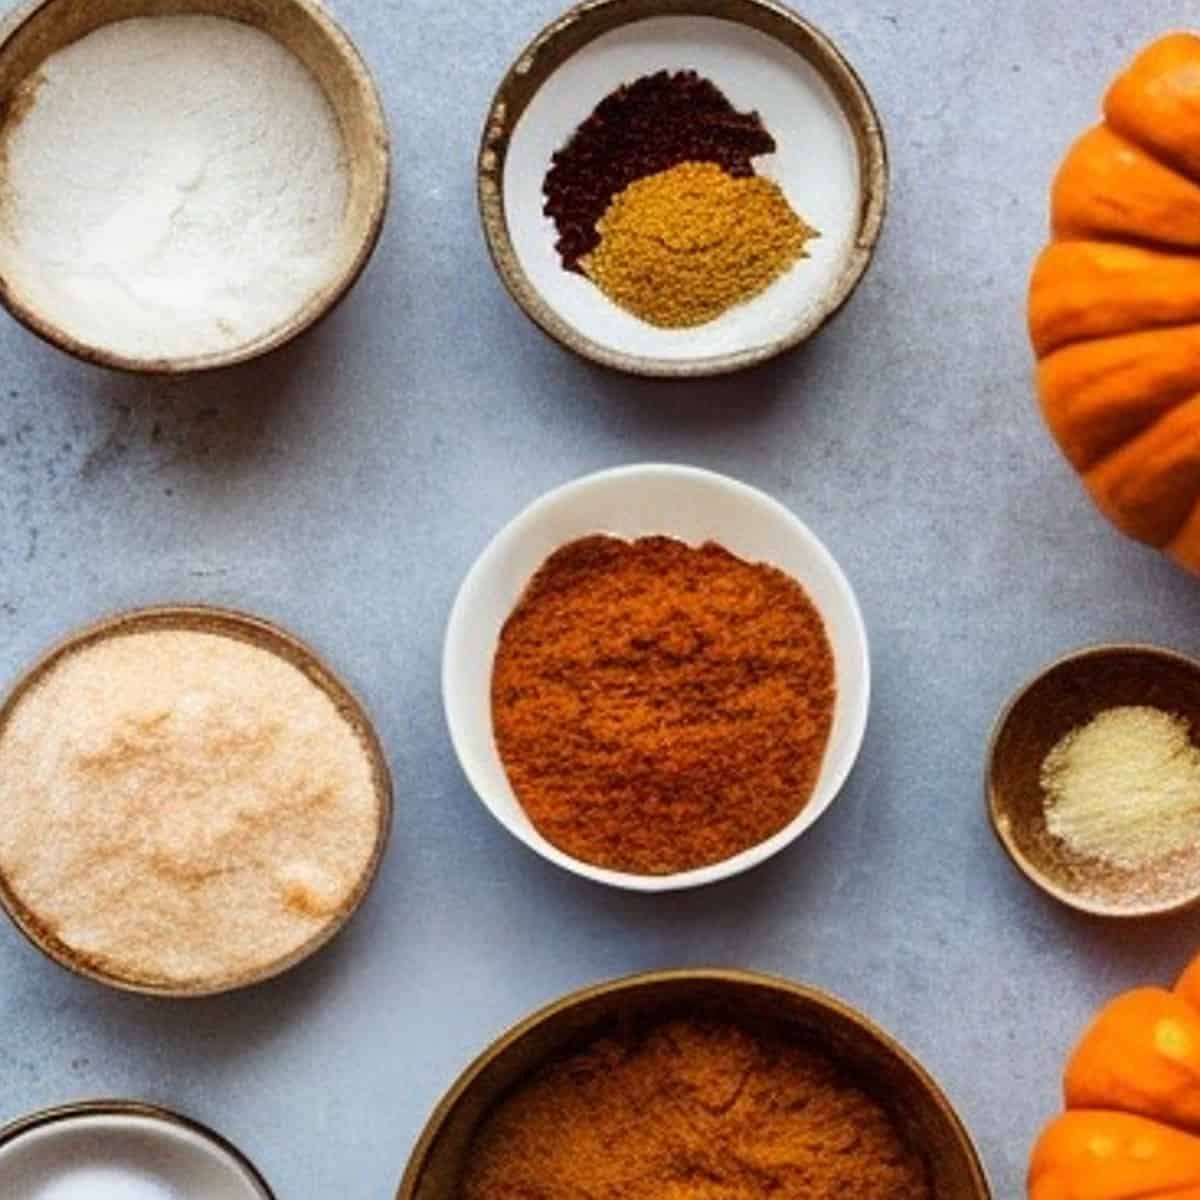 ingredients for pumpkin coconut cookies include pumpkin, flour, and spices. 